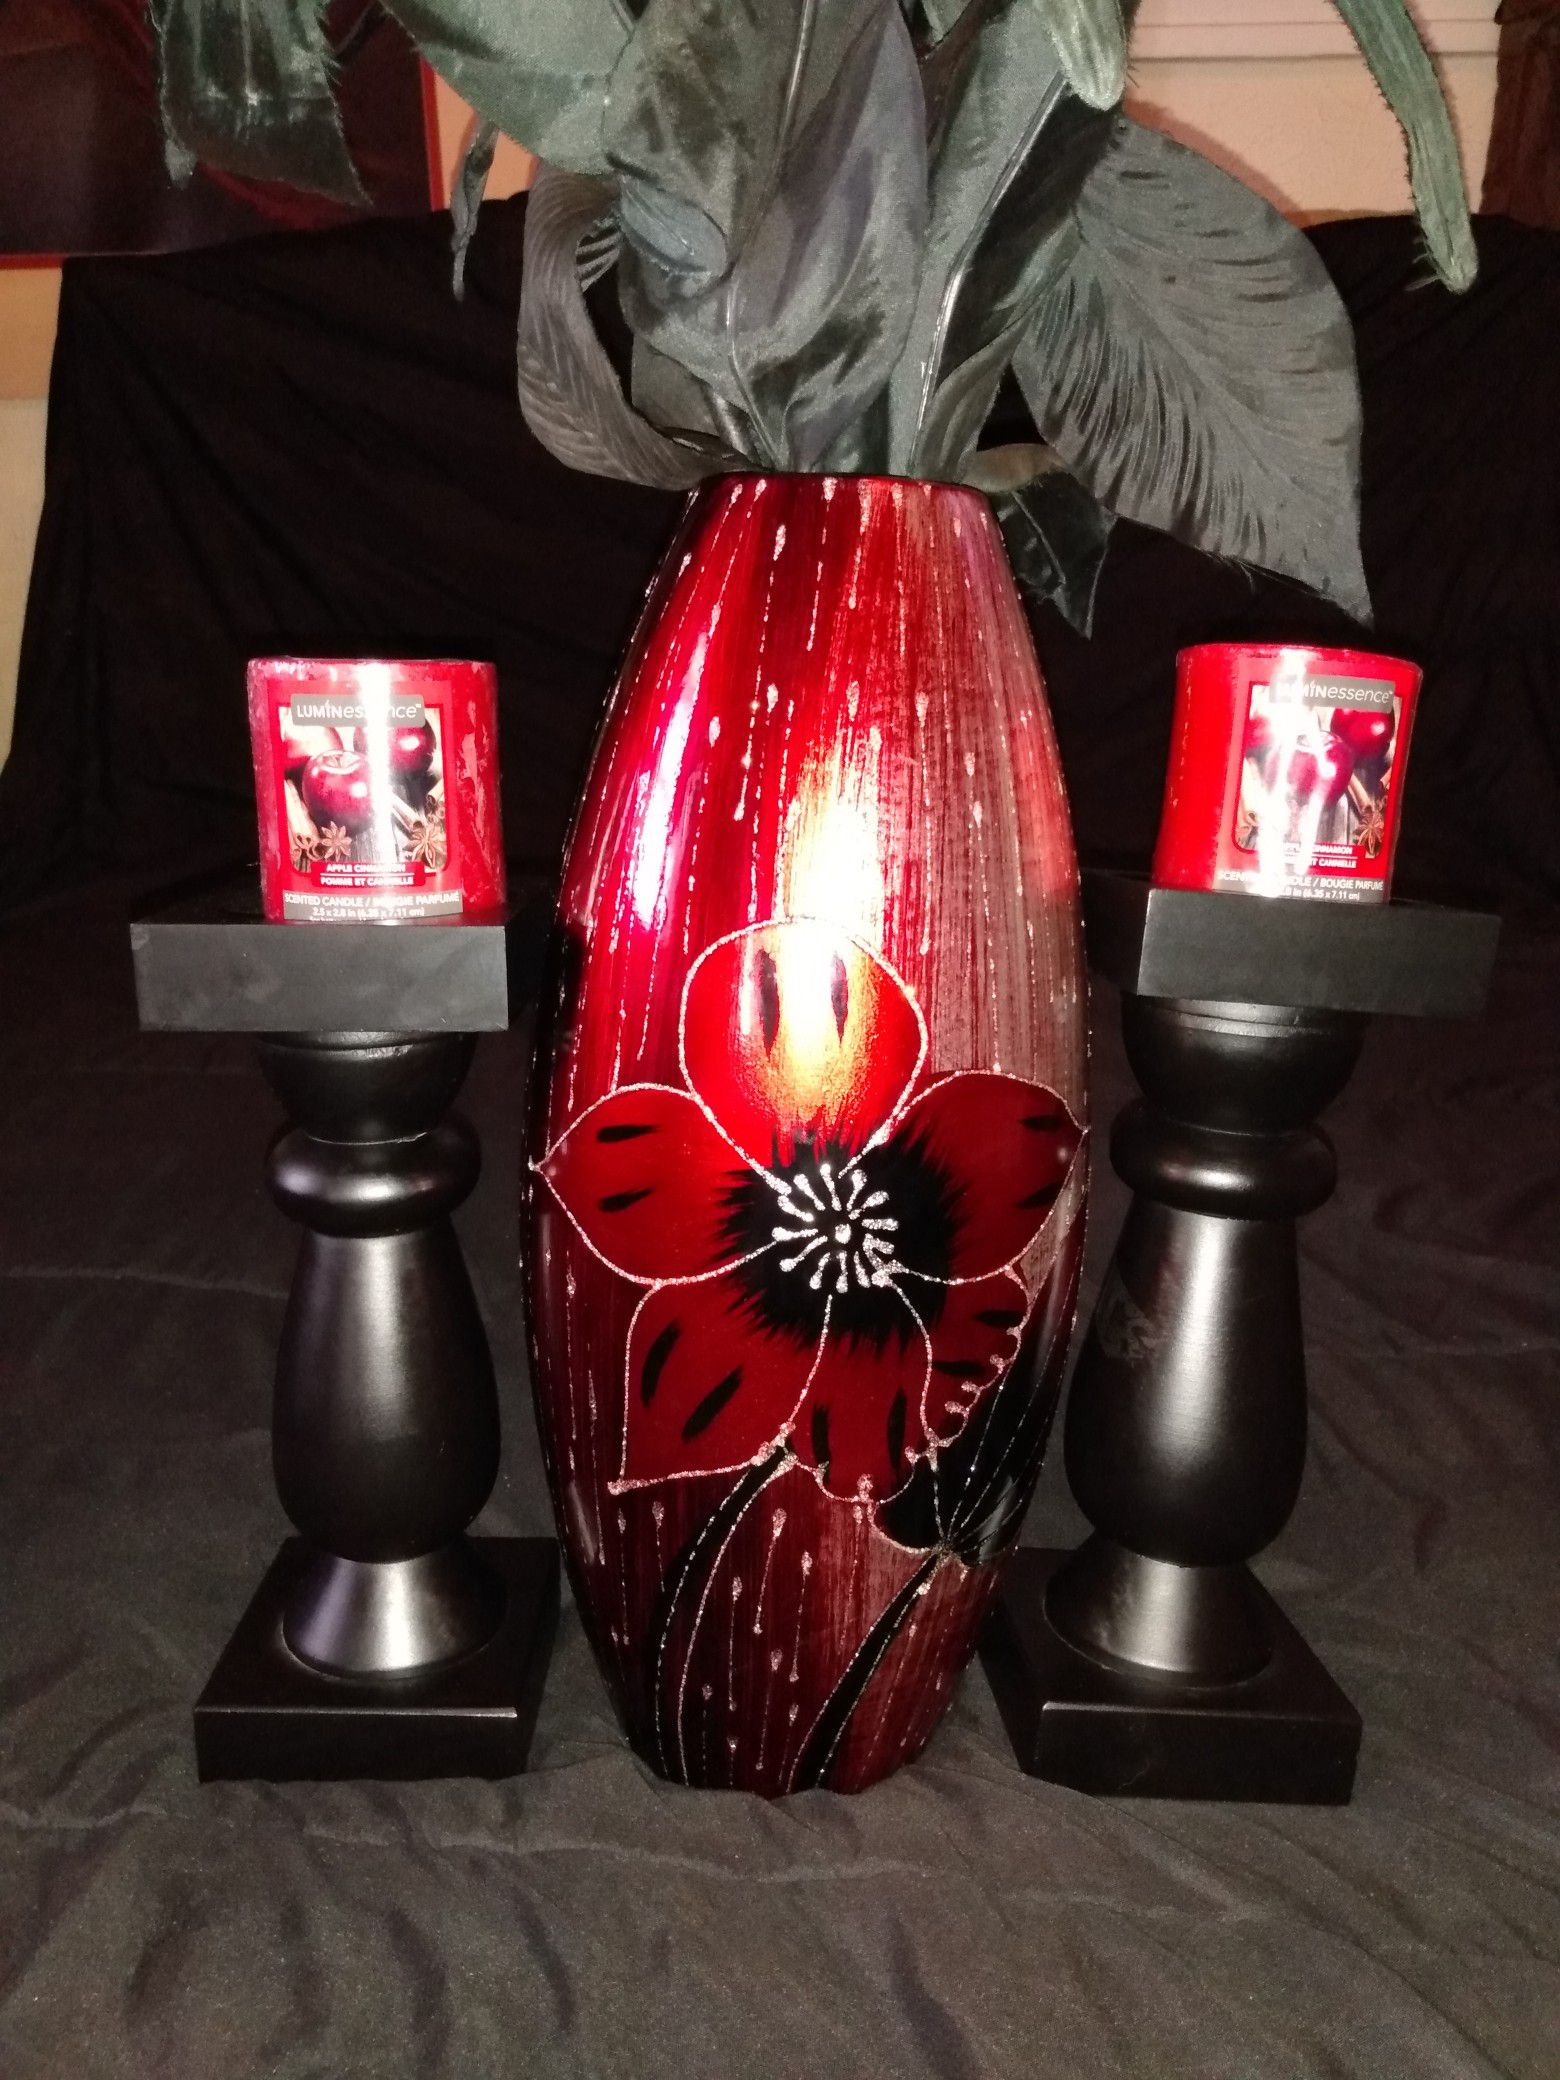 $55 very beautiful 8"-10" tall Vase with flowers inside + (2) Black Candle holders + (2) scented candles all for $55 Instagram: Candymoniquesfashion